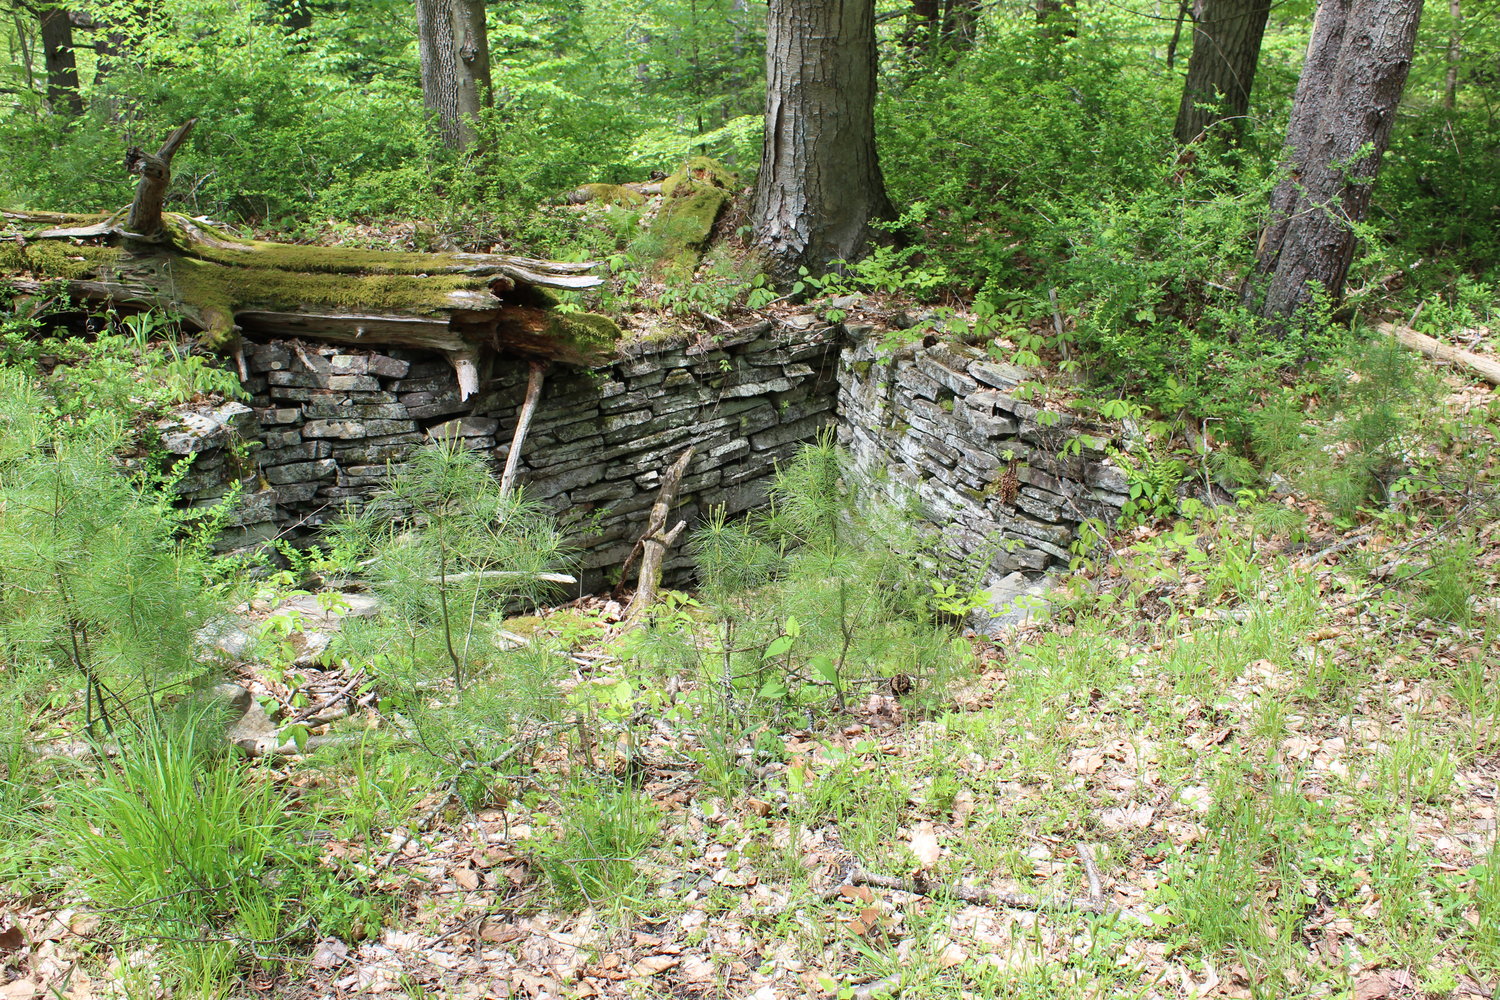 Old foundations are scattered throughout the region. Was this small space an old root cellar?